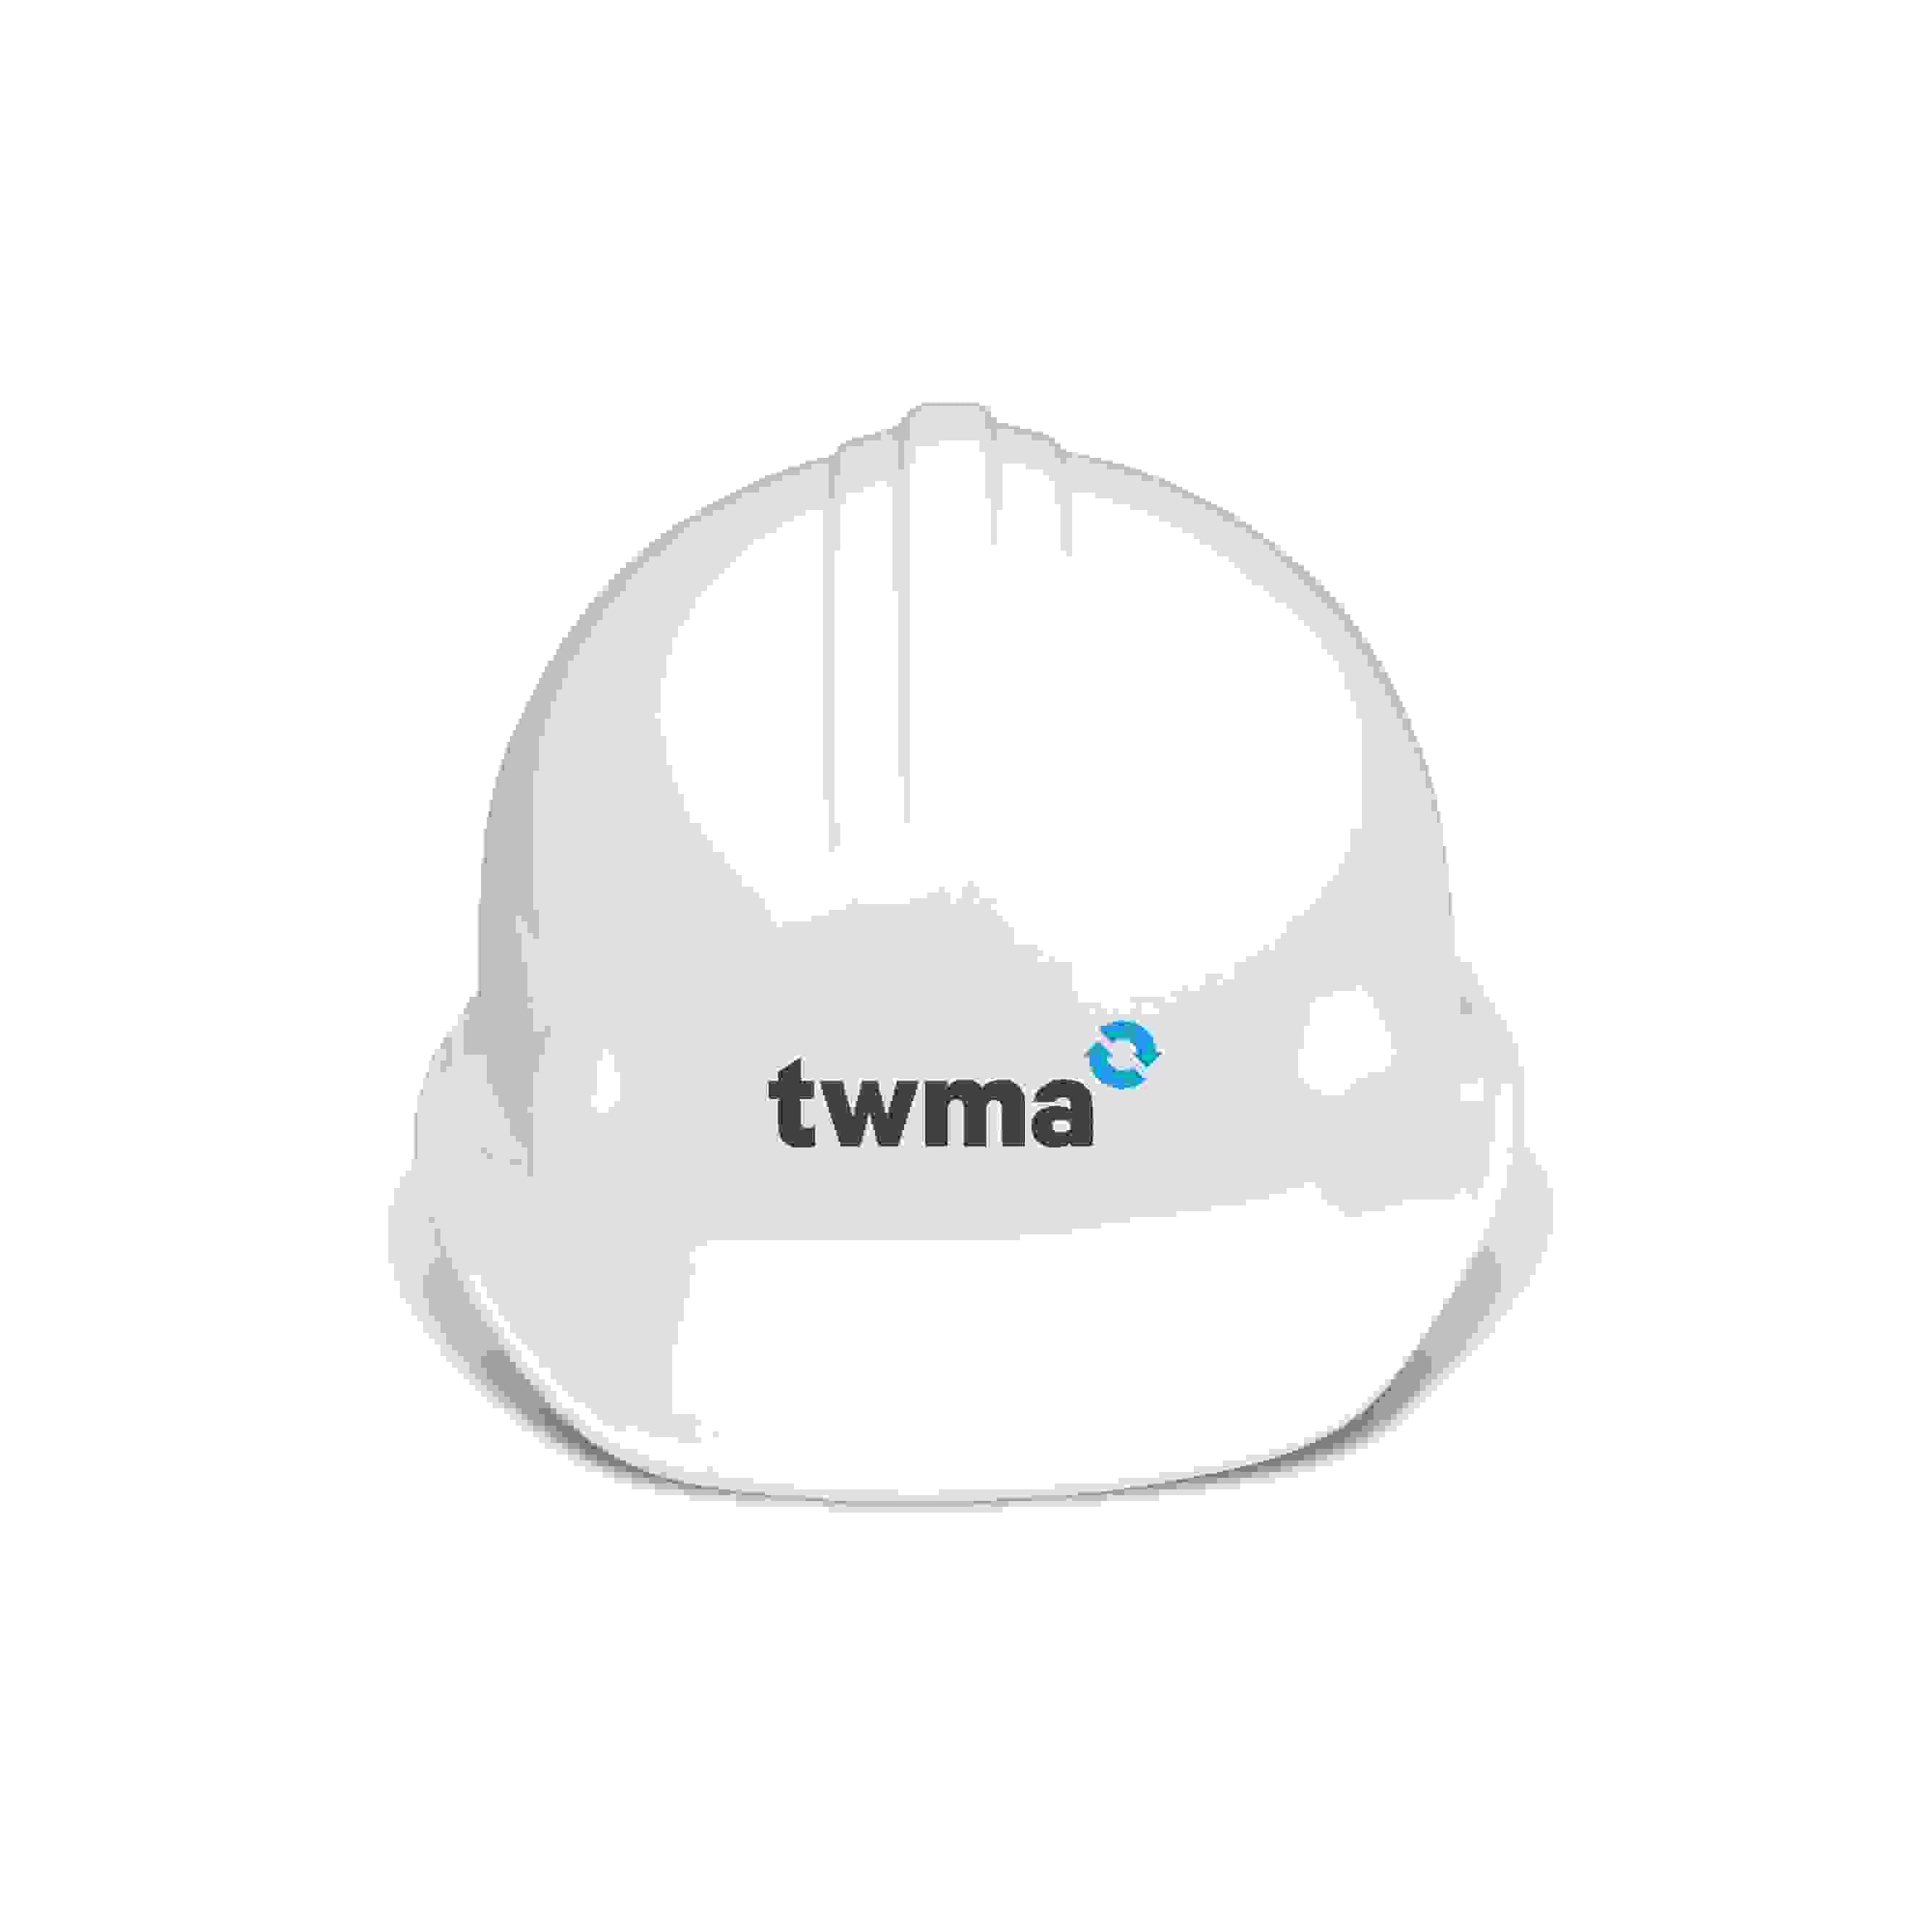 TWMA reaches 9 years LTI free operations in Egypt